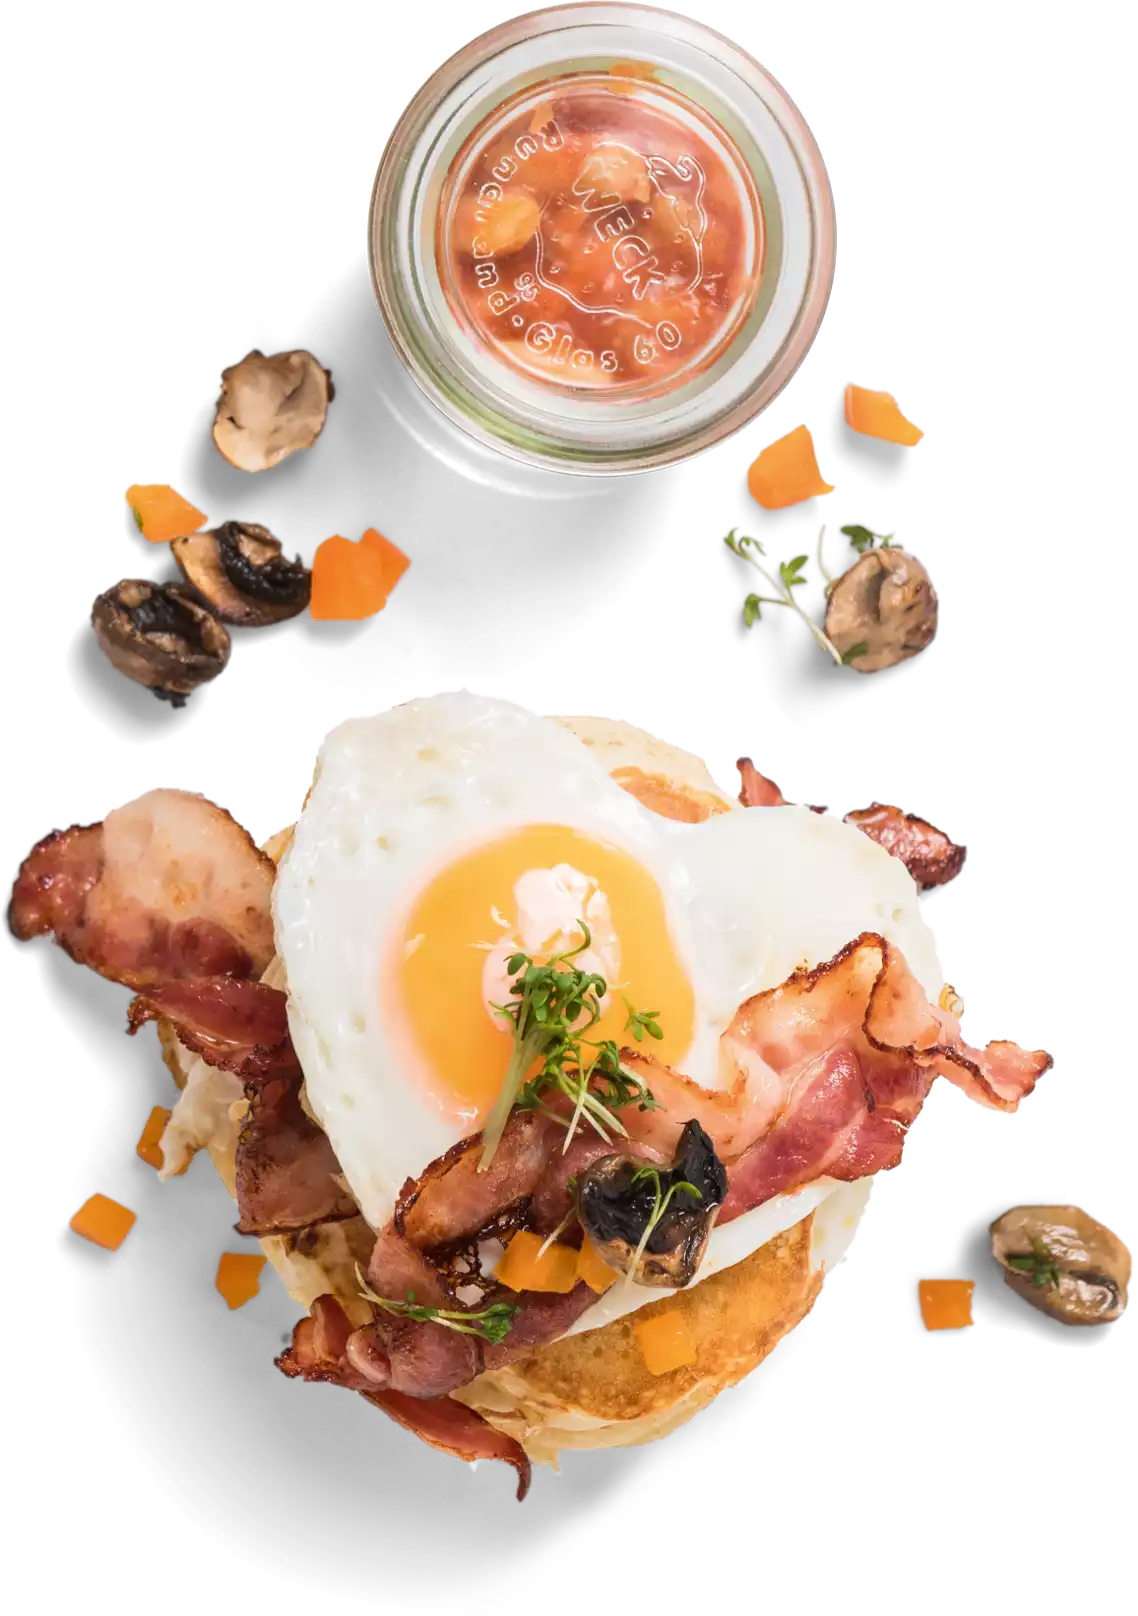 Heart-shaped fried egg on pancakes with bacon and baked beans in a small jar – a California Bean signature dish